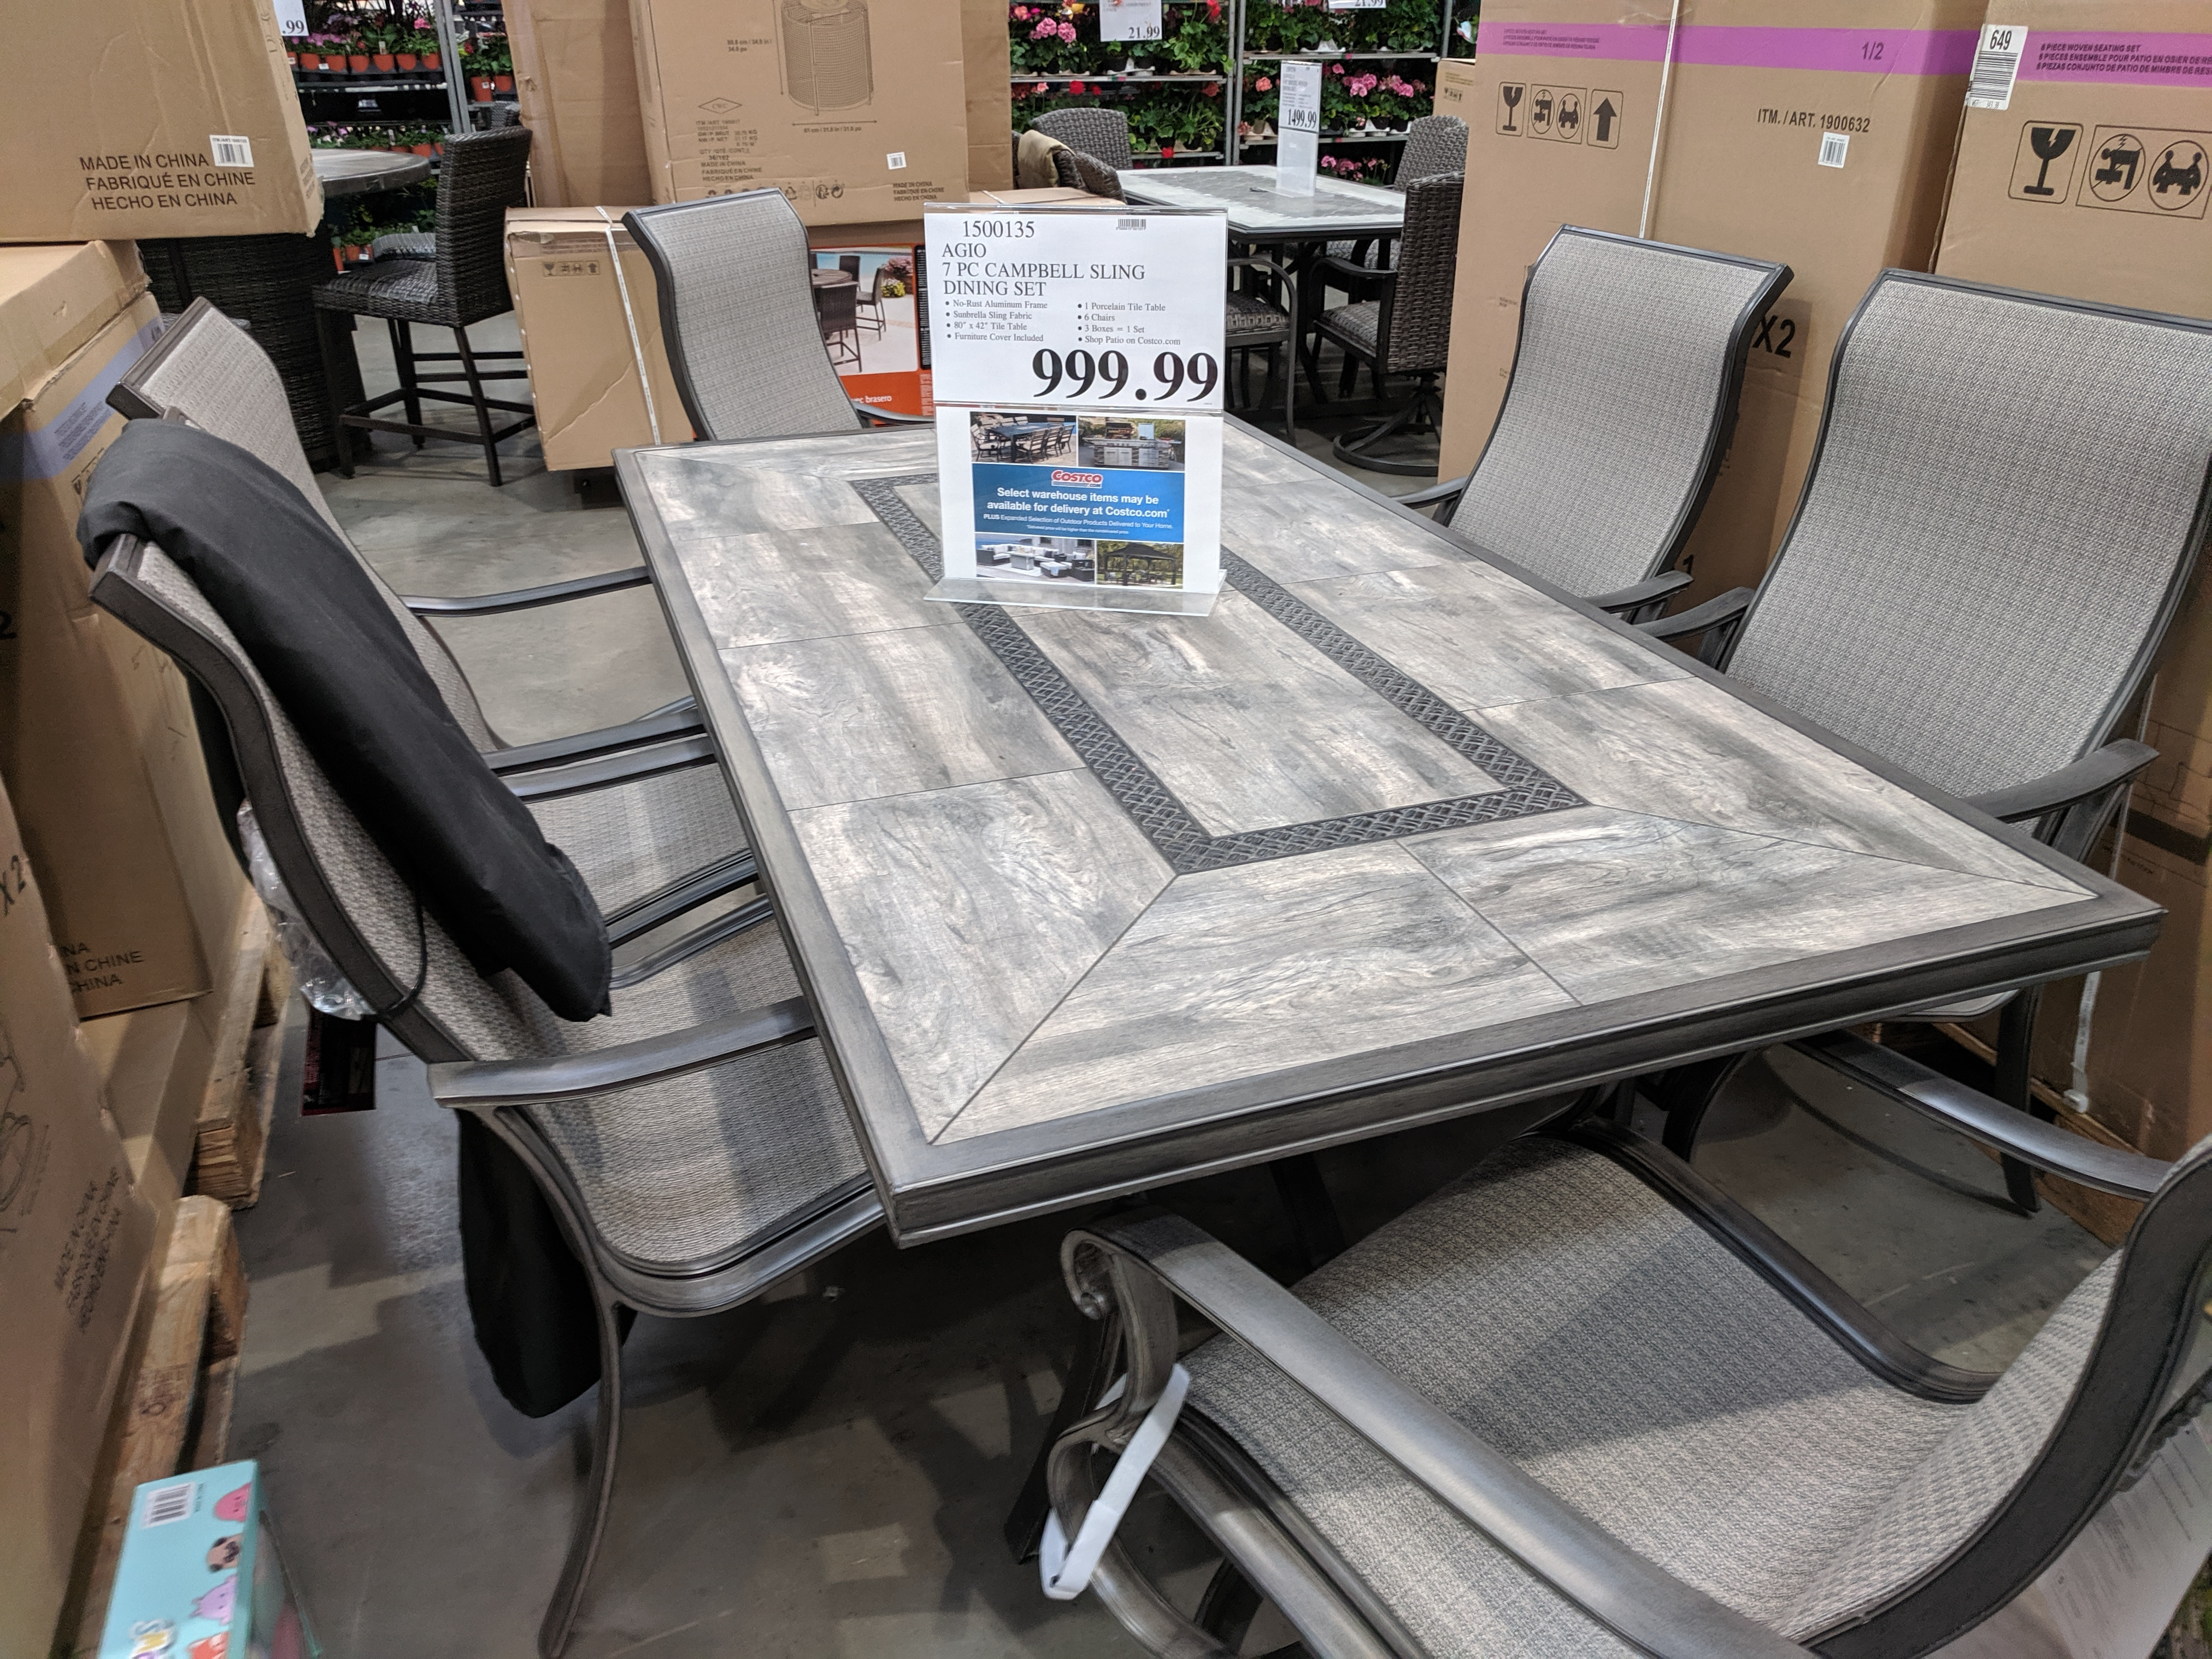 Outdoor Patio Furniture At Costco Roundup - My Wholesale Life with Costco Patio Furniture Sets